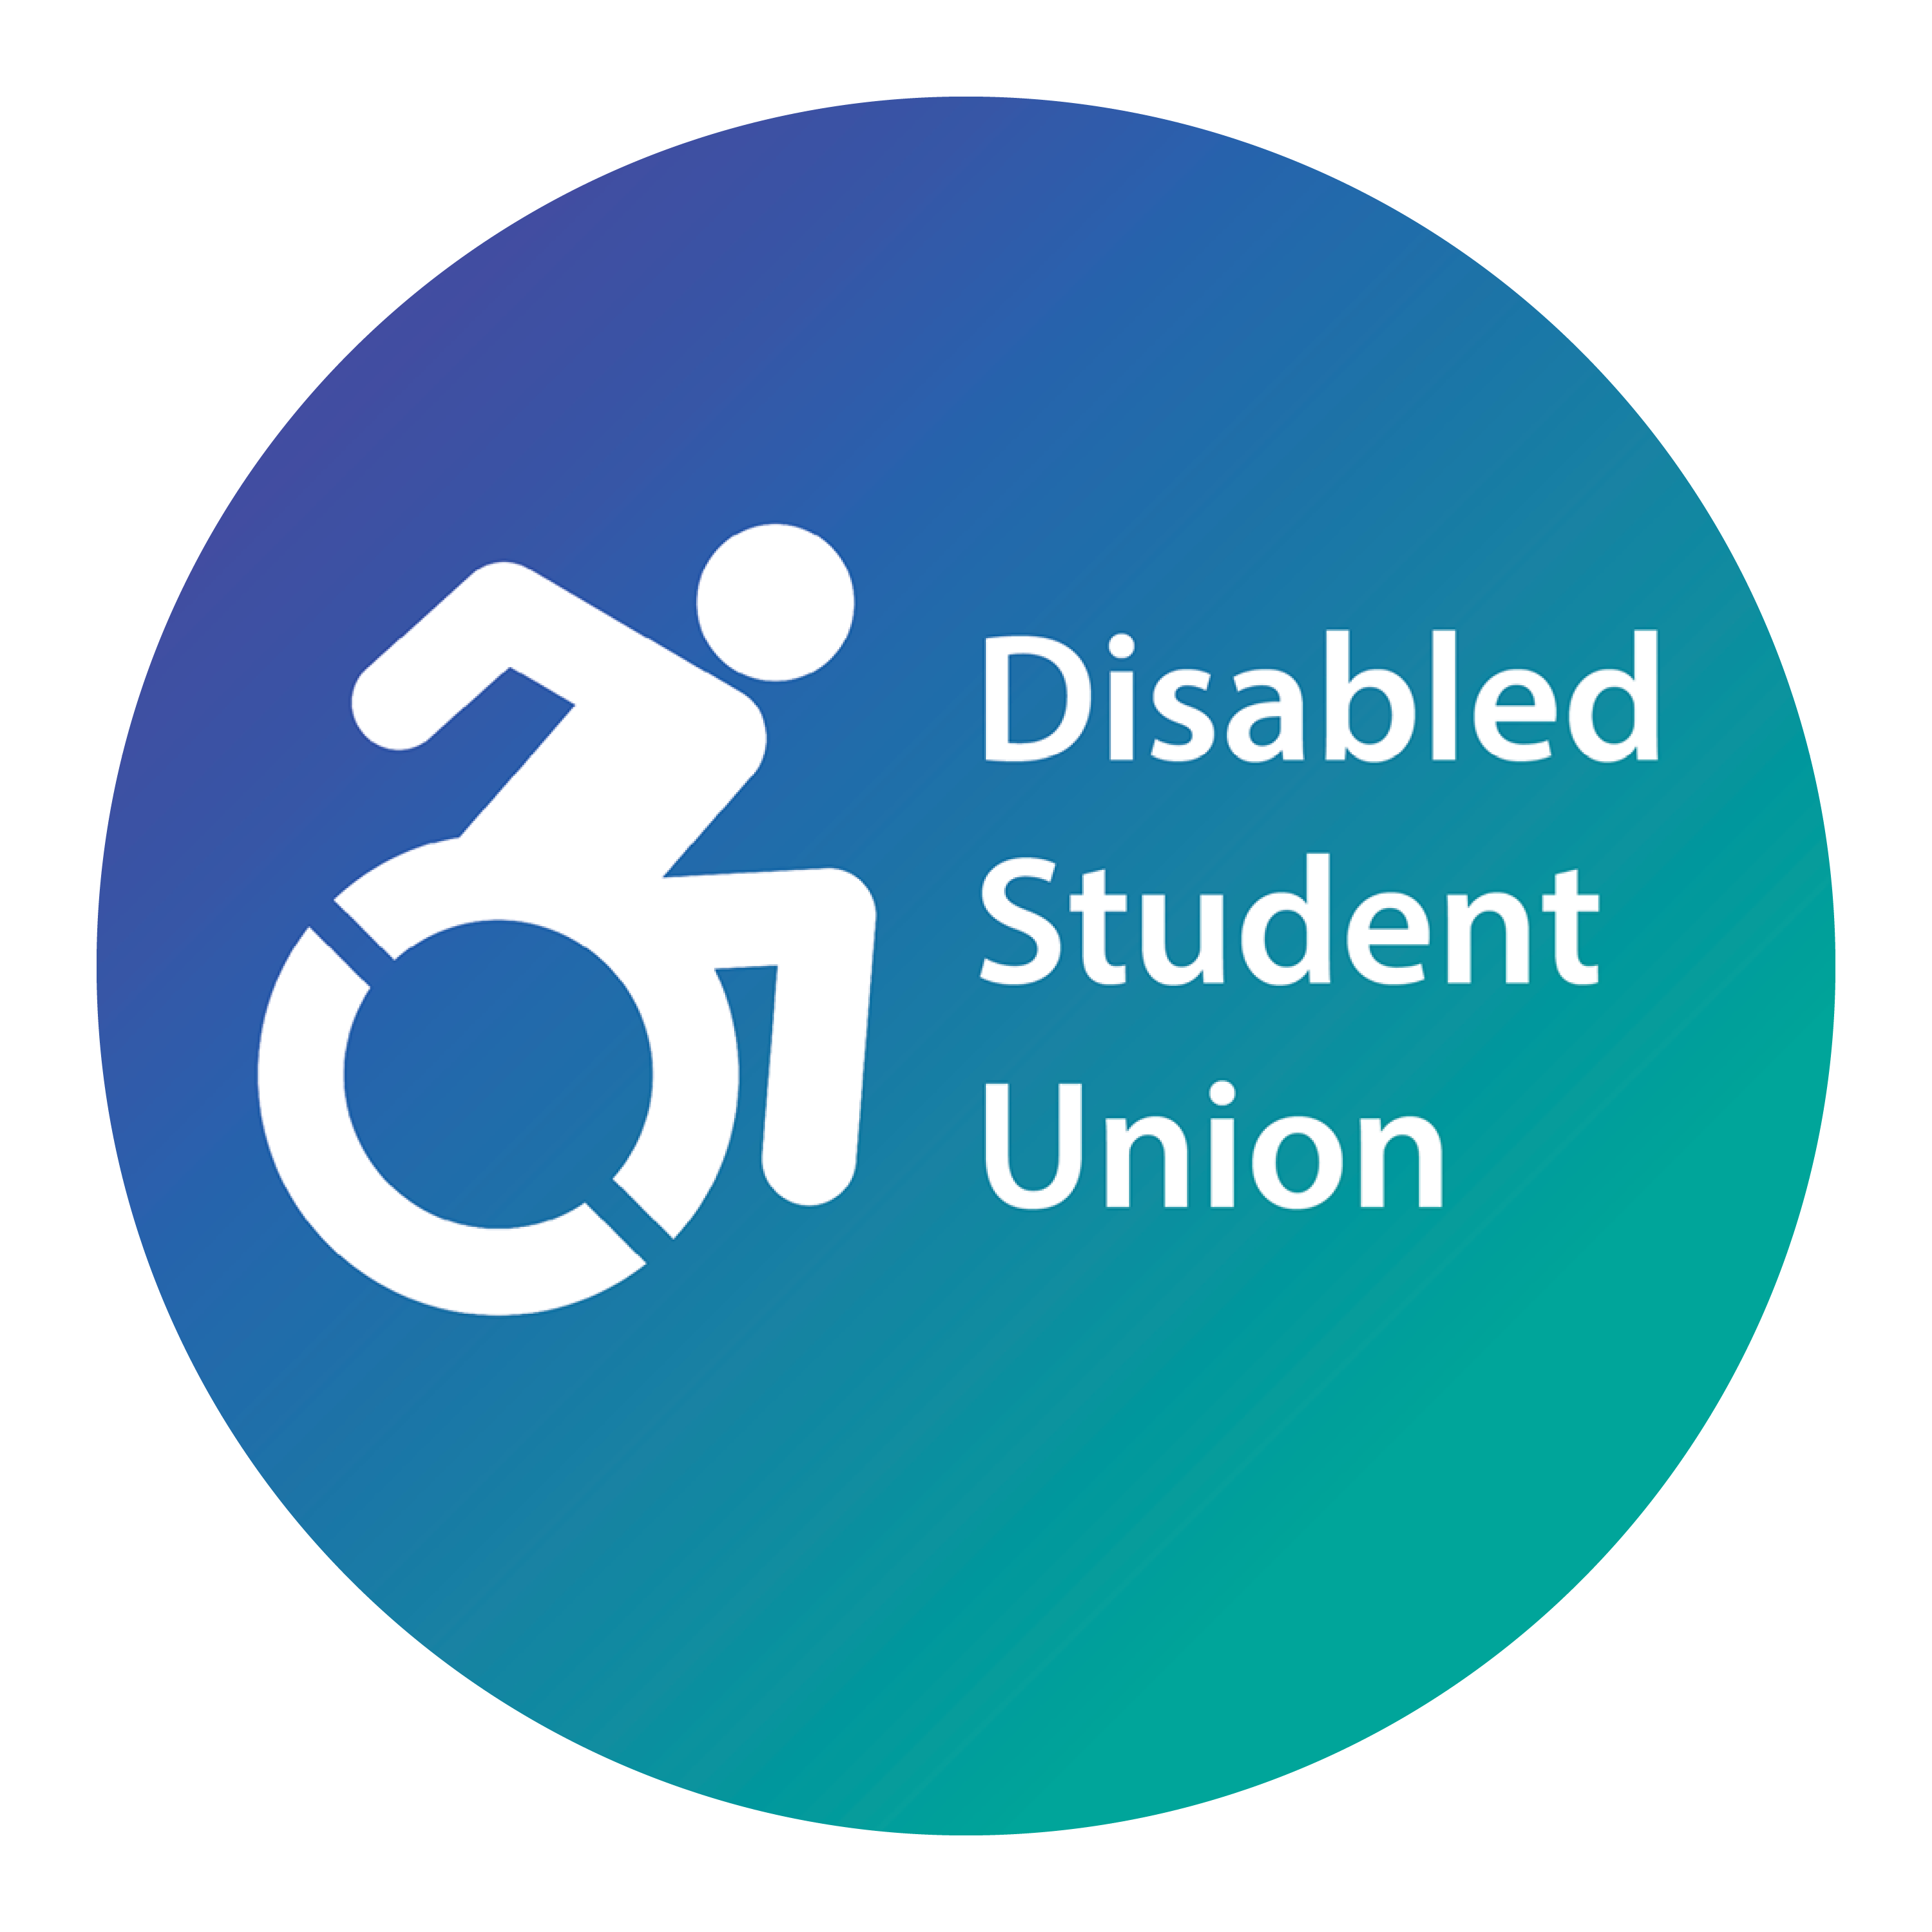 Disabled Student Union Logo: gradient of purple, disability blue, and a mint green from top left to bottom right. Uses Accessible Icon Project disability symbol.